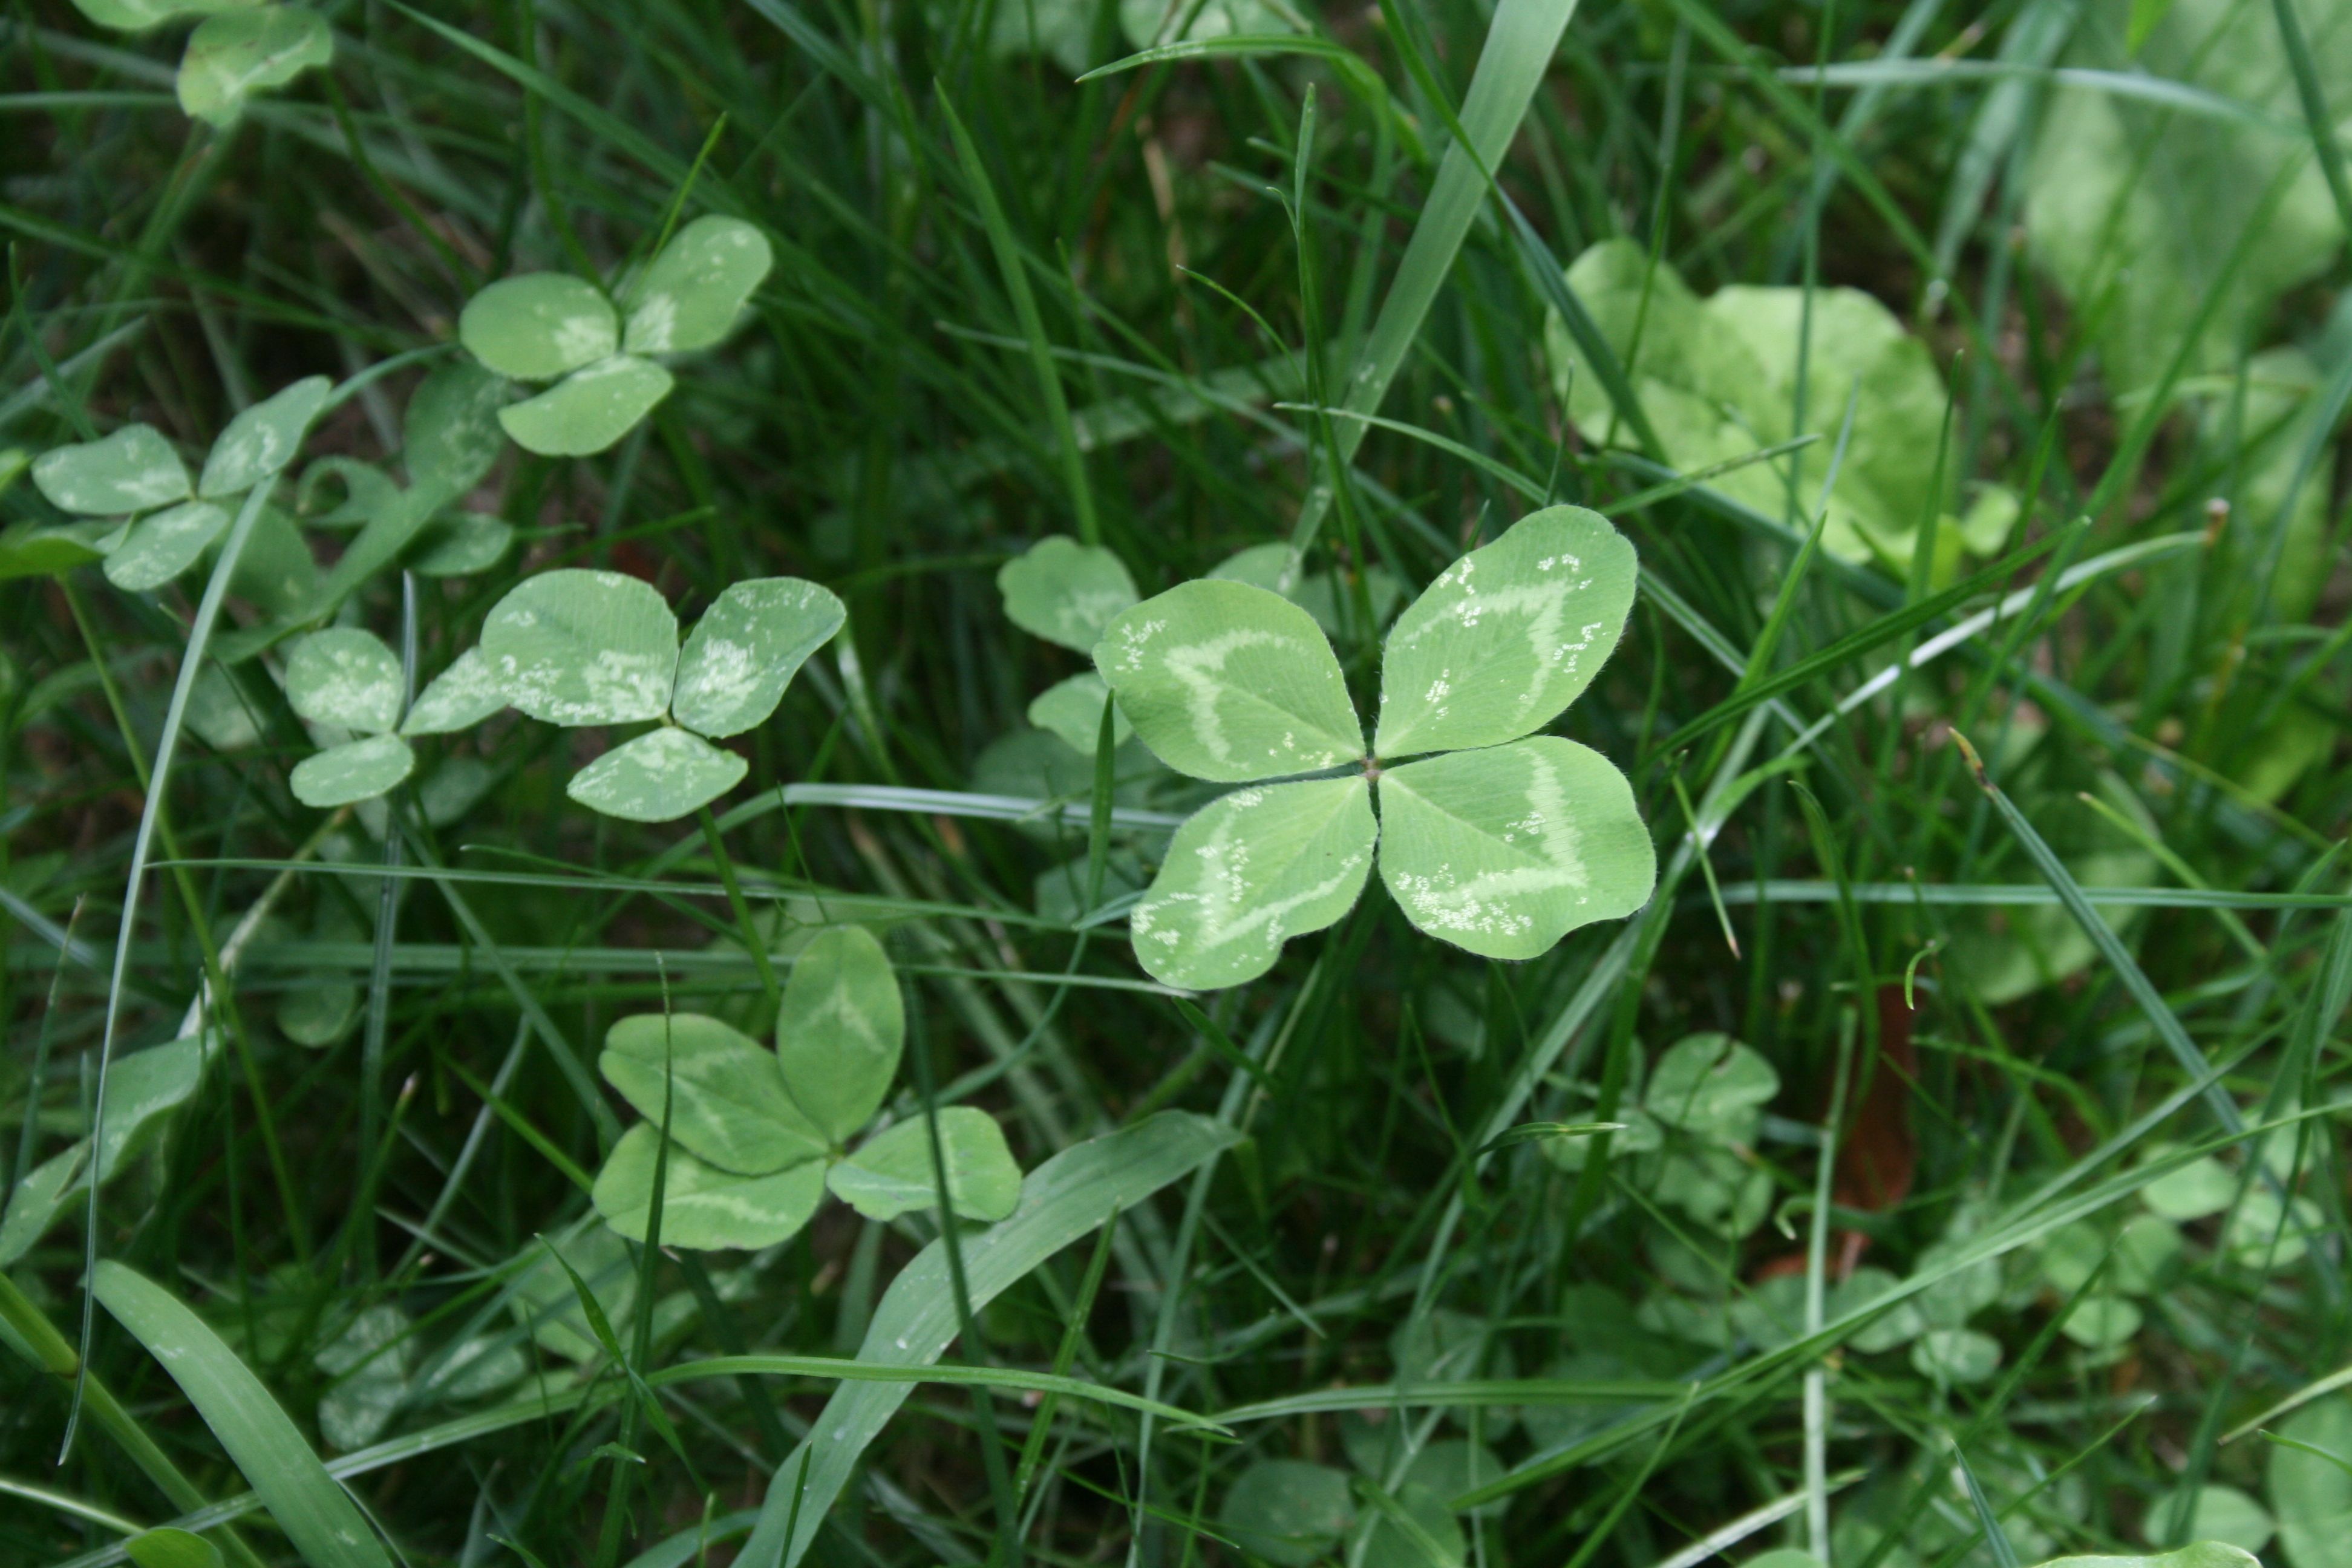 How to Find a Four-Leaf Clover (and Other News You Can Use!)